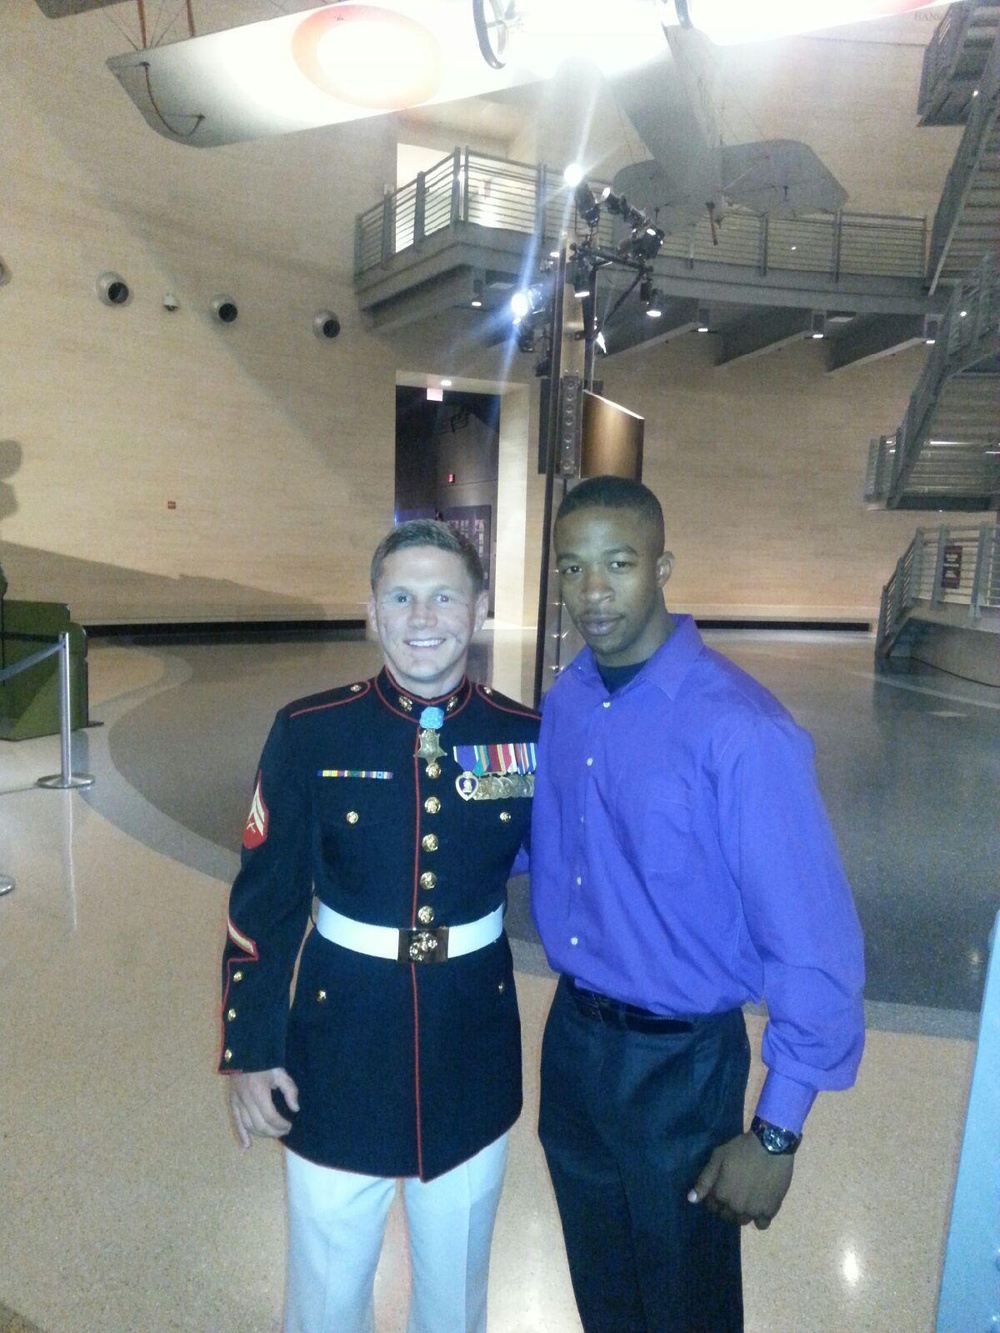 3rd MAW Marine attends former recruit’s Medal of Honor ceremony